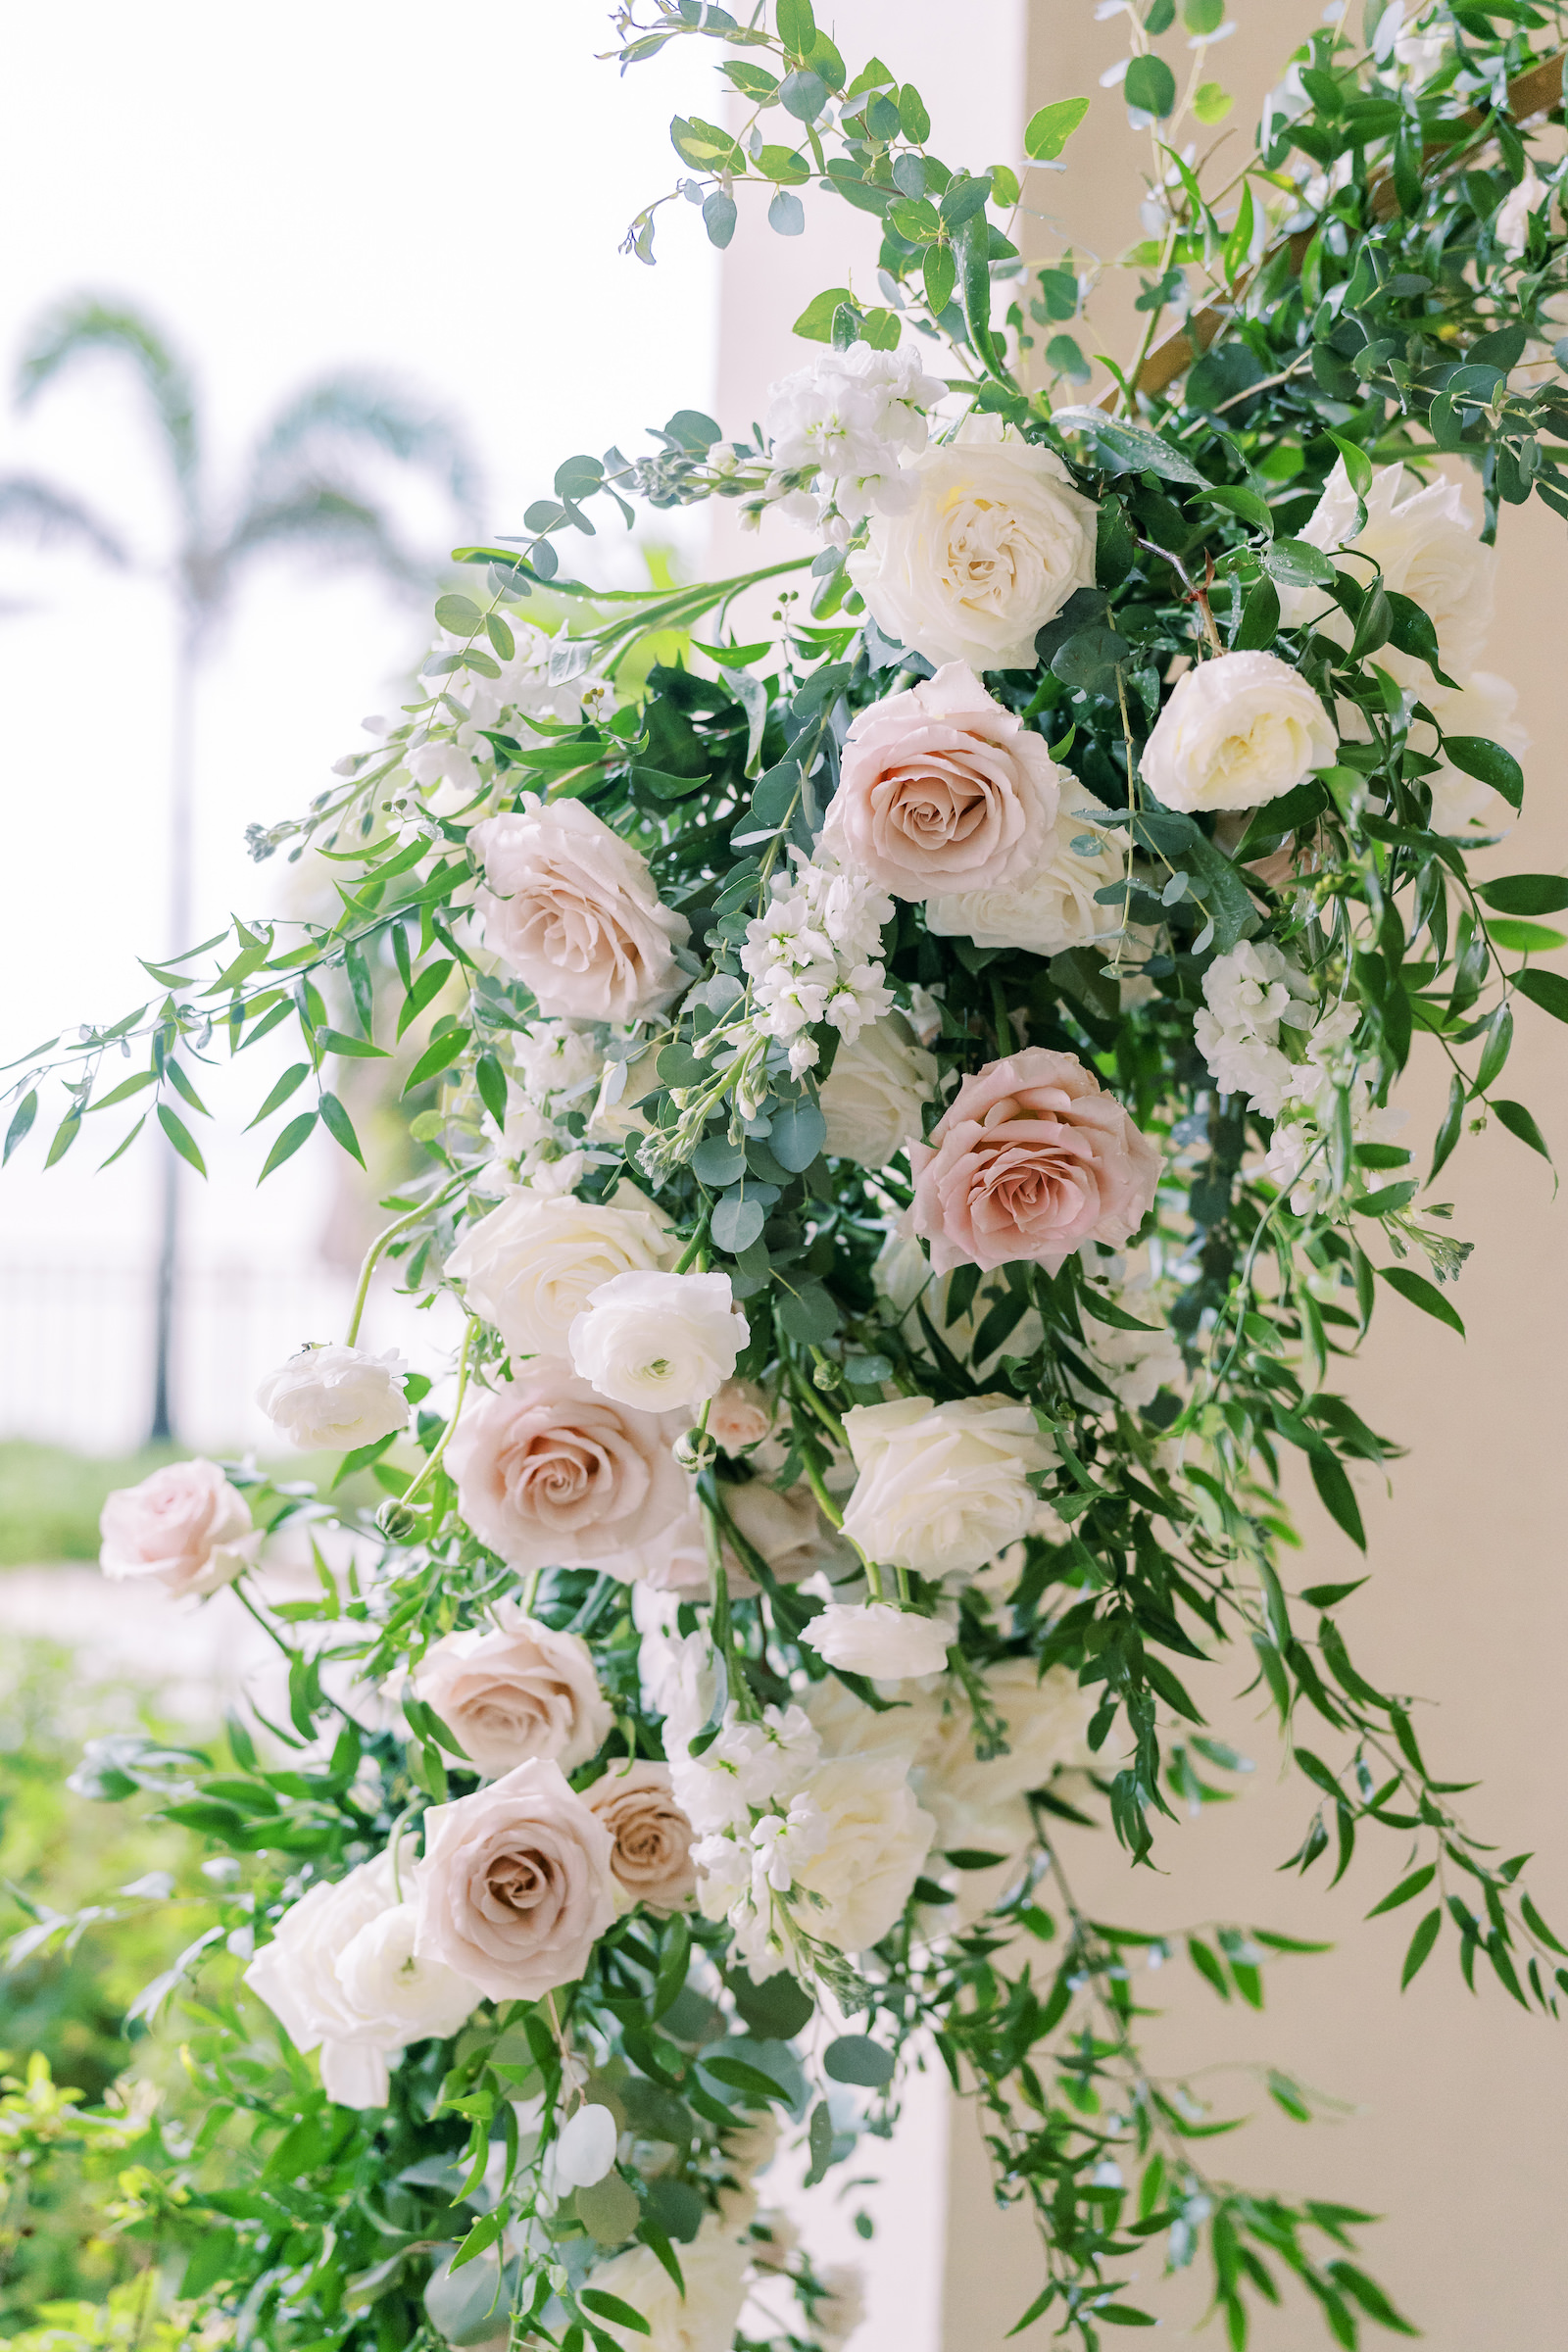 Blush Roses and White Ranunculus Floral Design Wedding Décor | Tampa Florida Wedding Planner MDP Events Planning